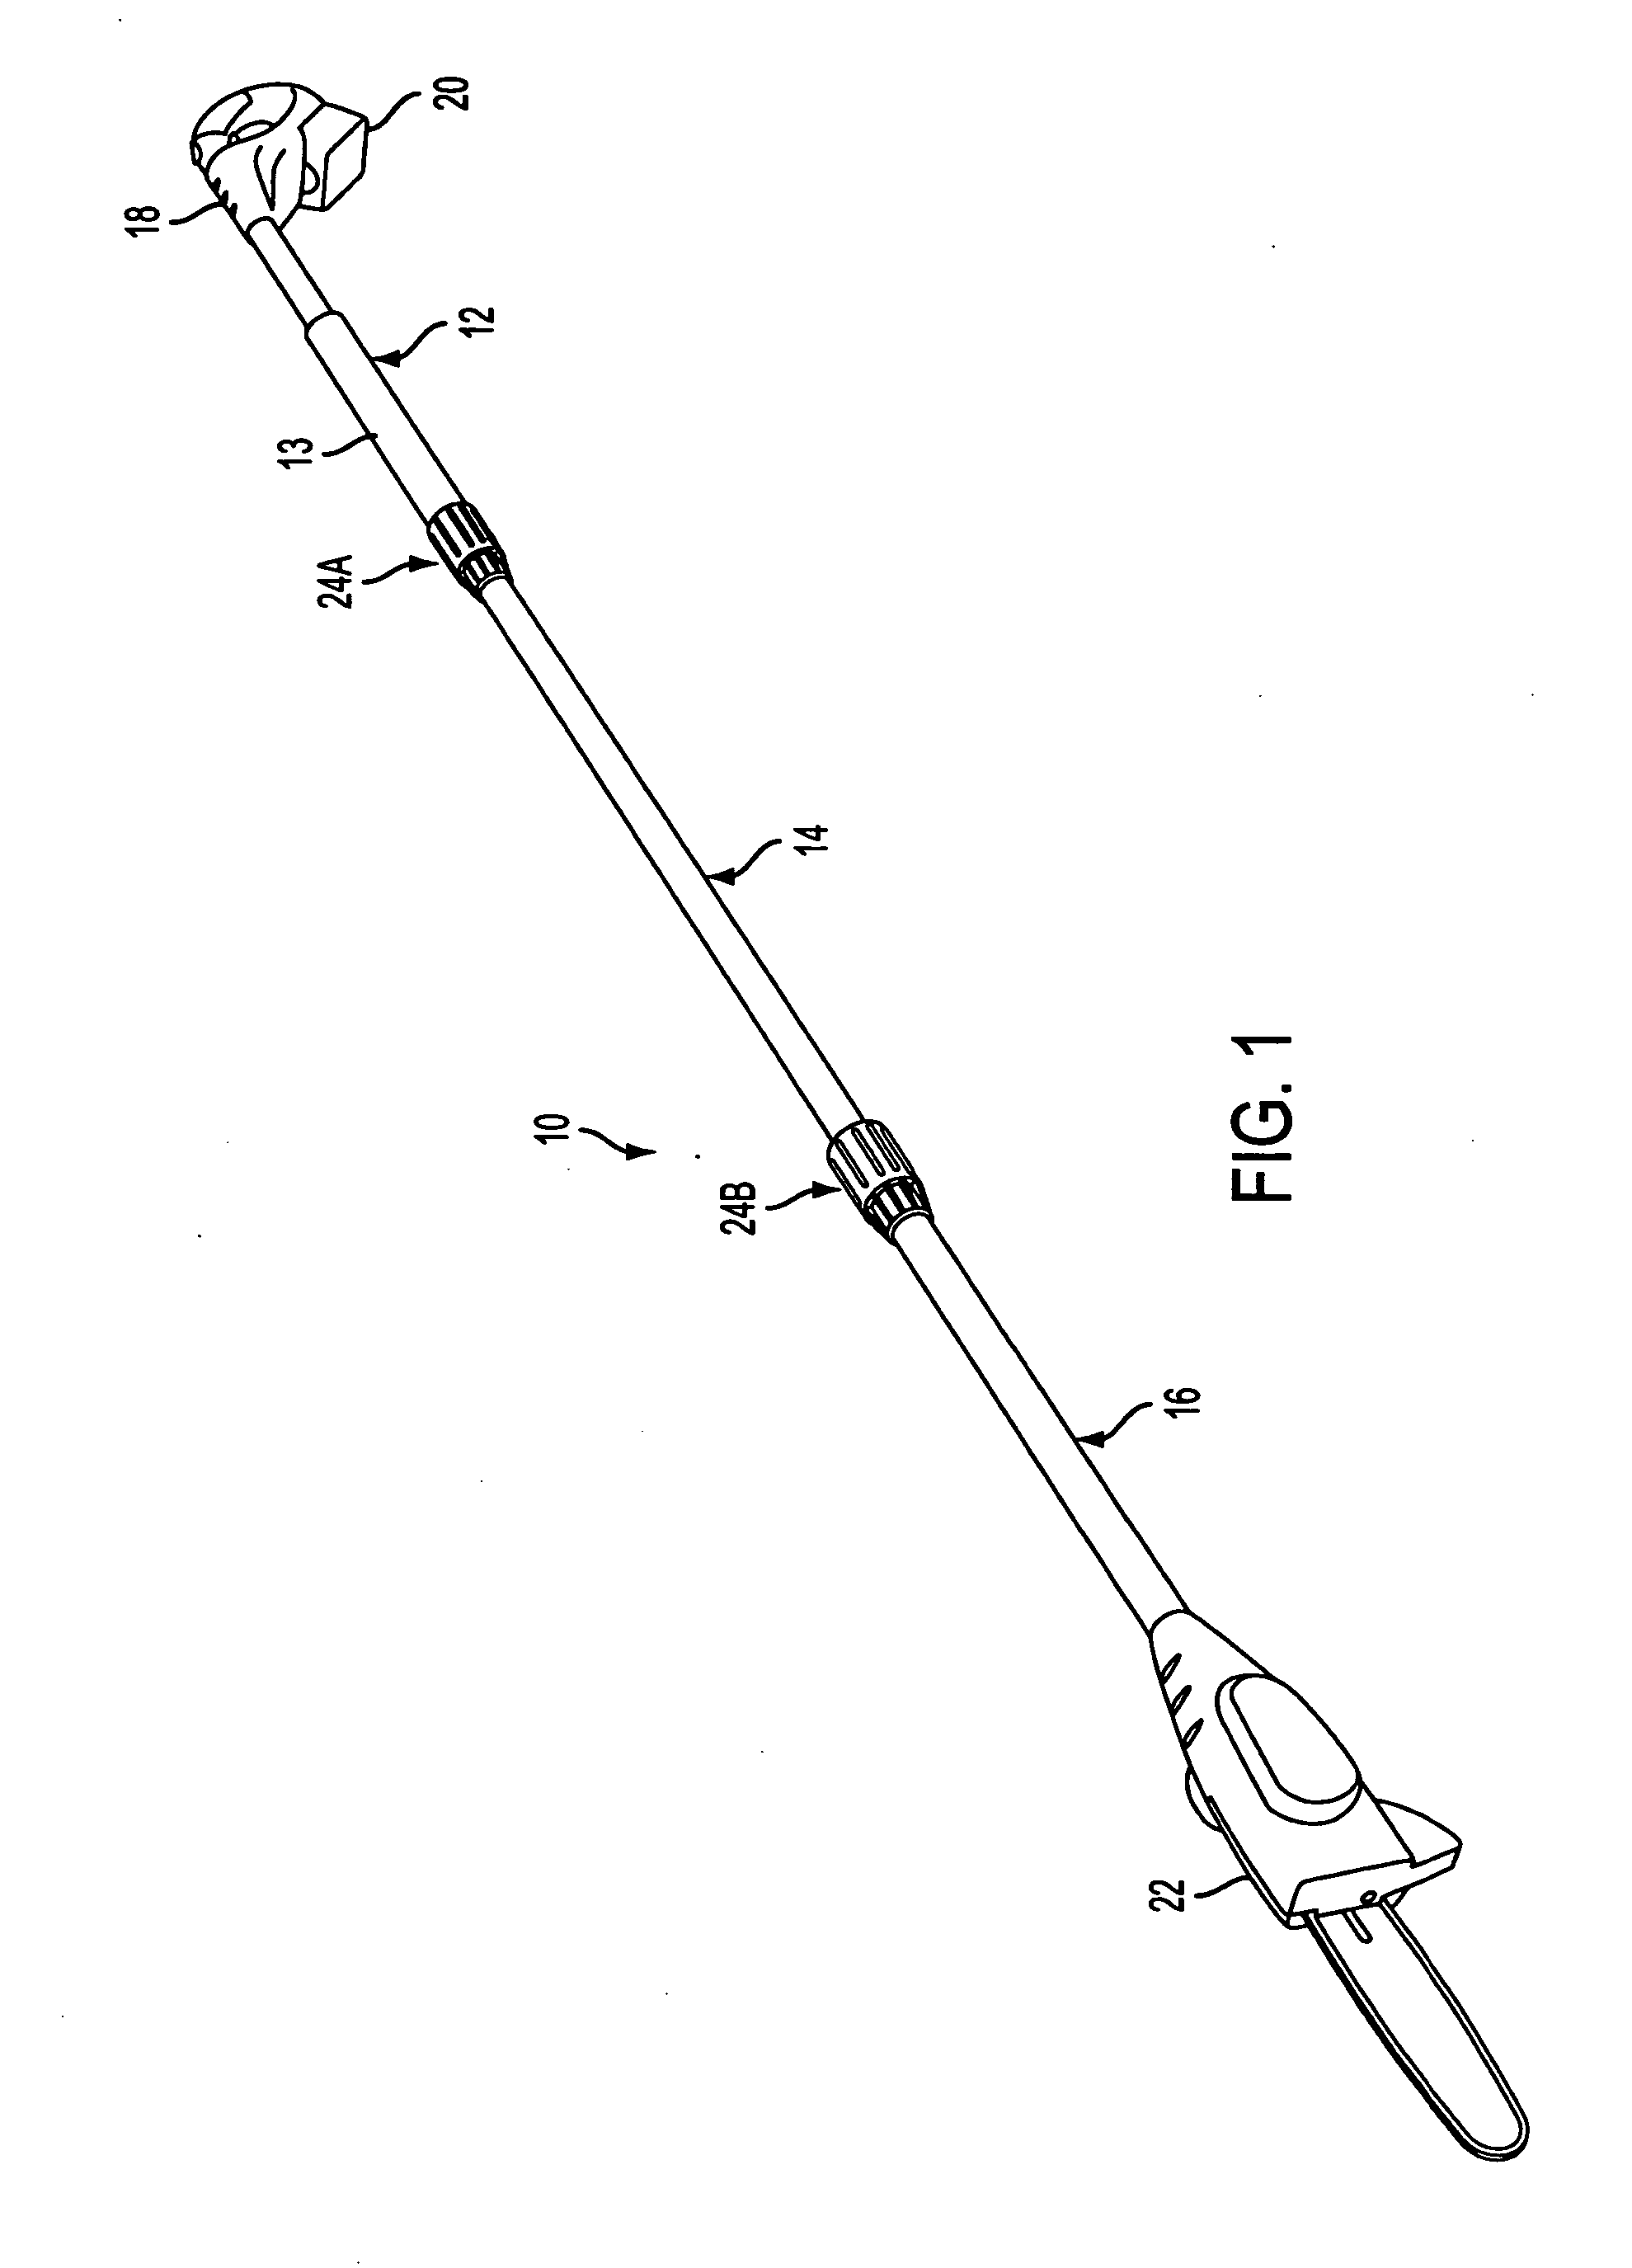 Extensible pole saw having separable sections